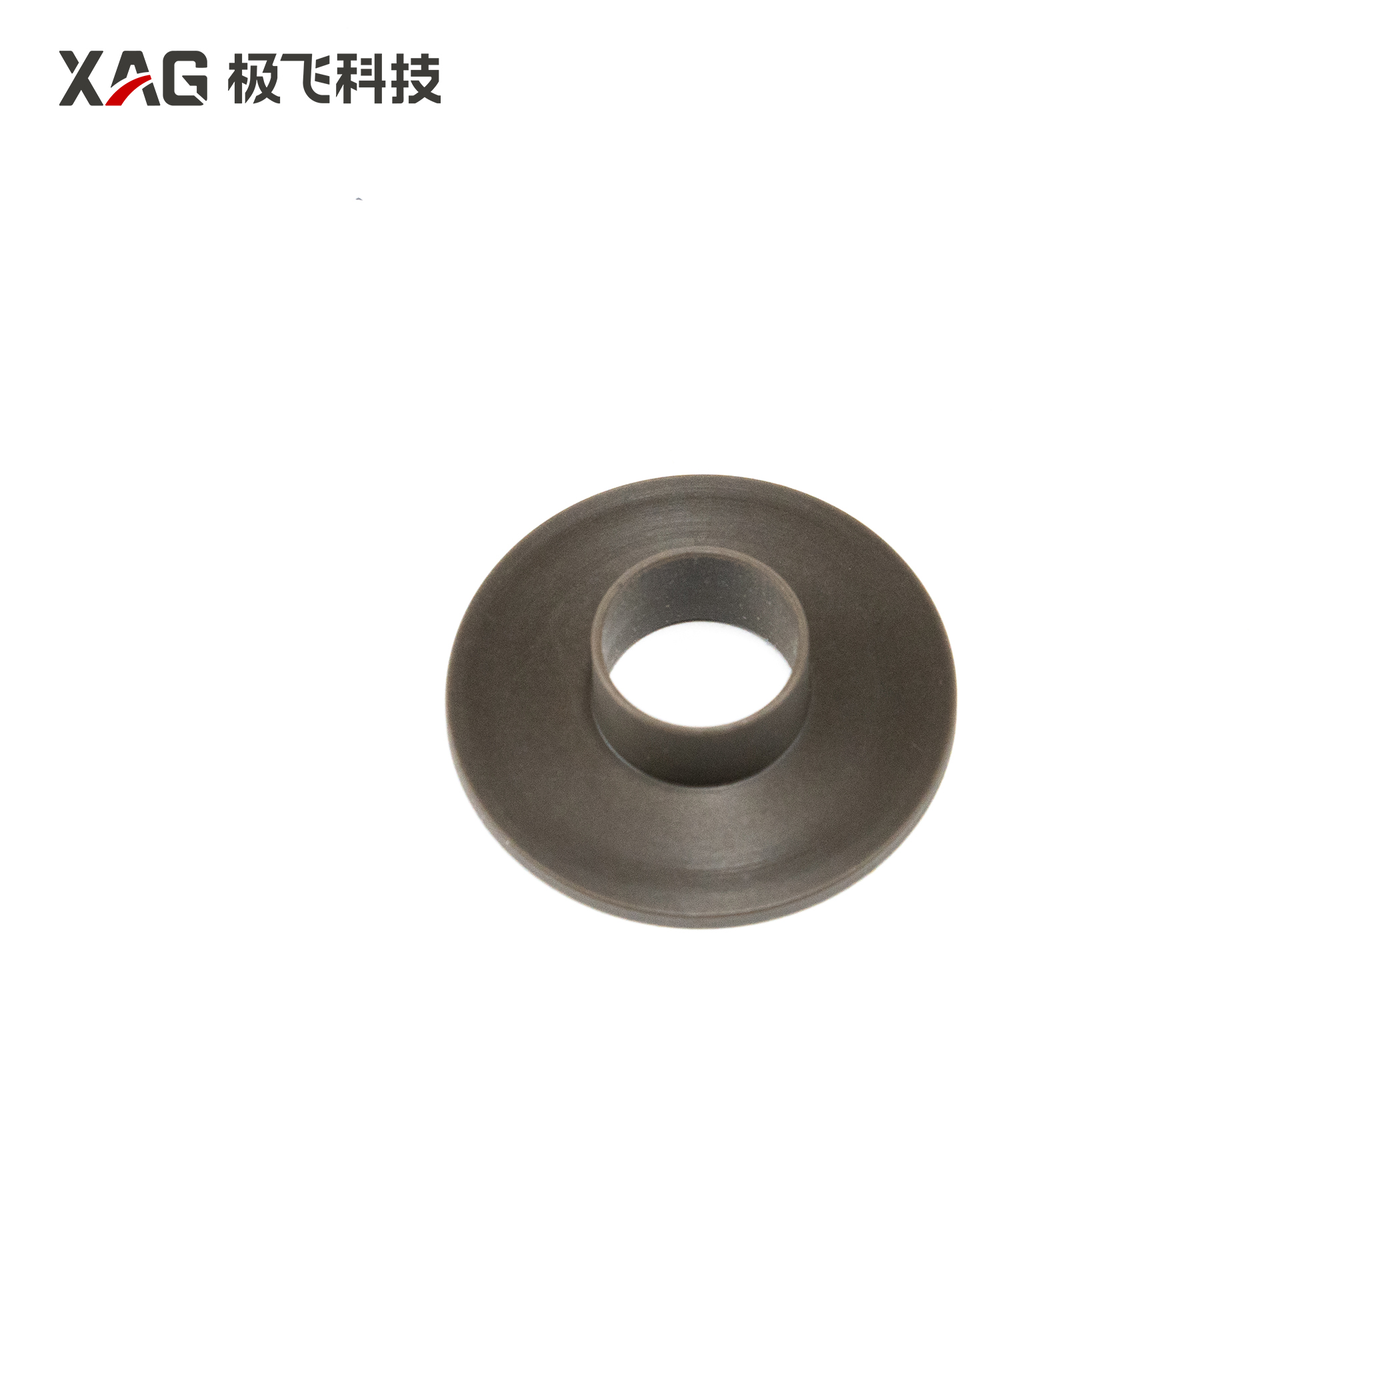 55 inch paddle integrated bushing CW (A1)